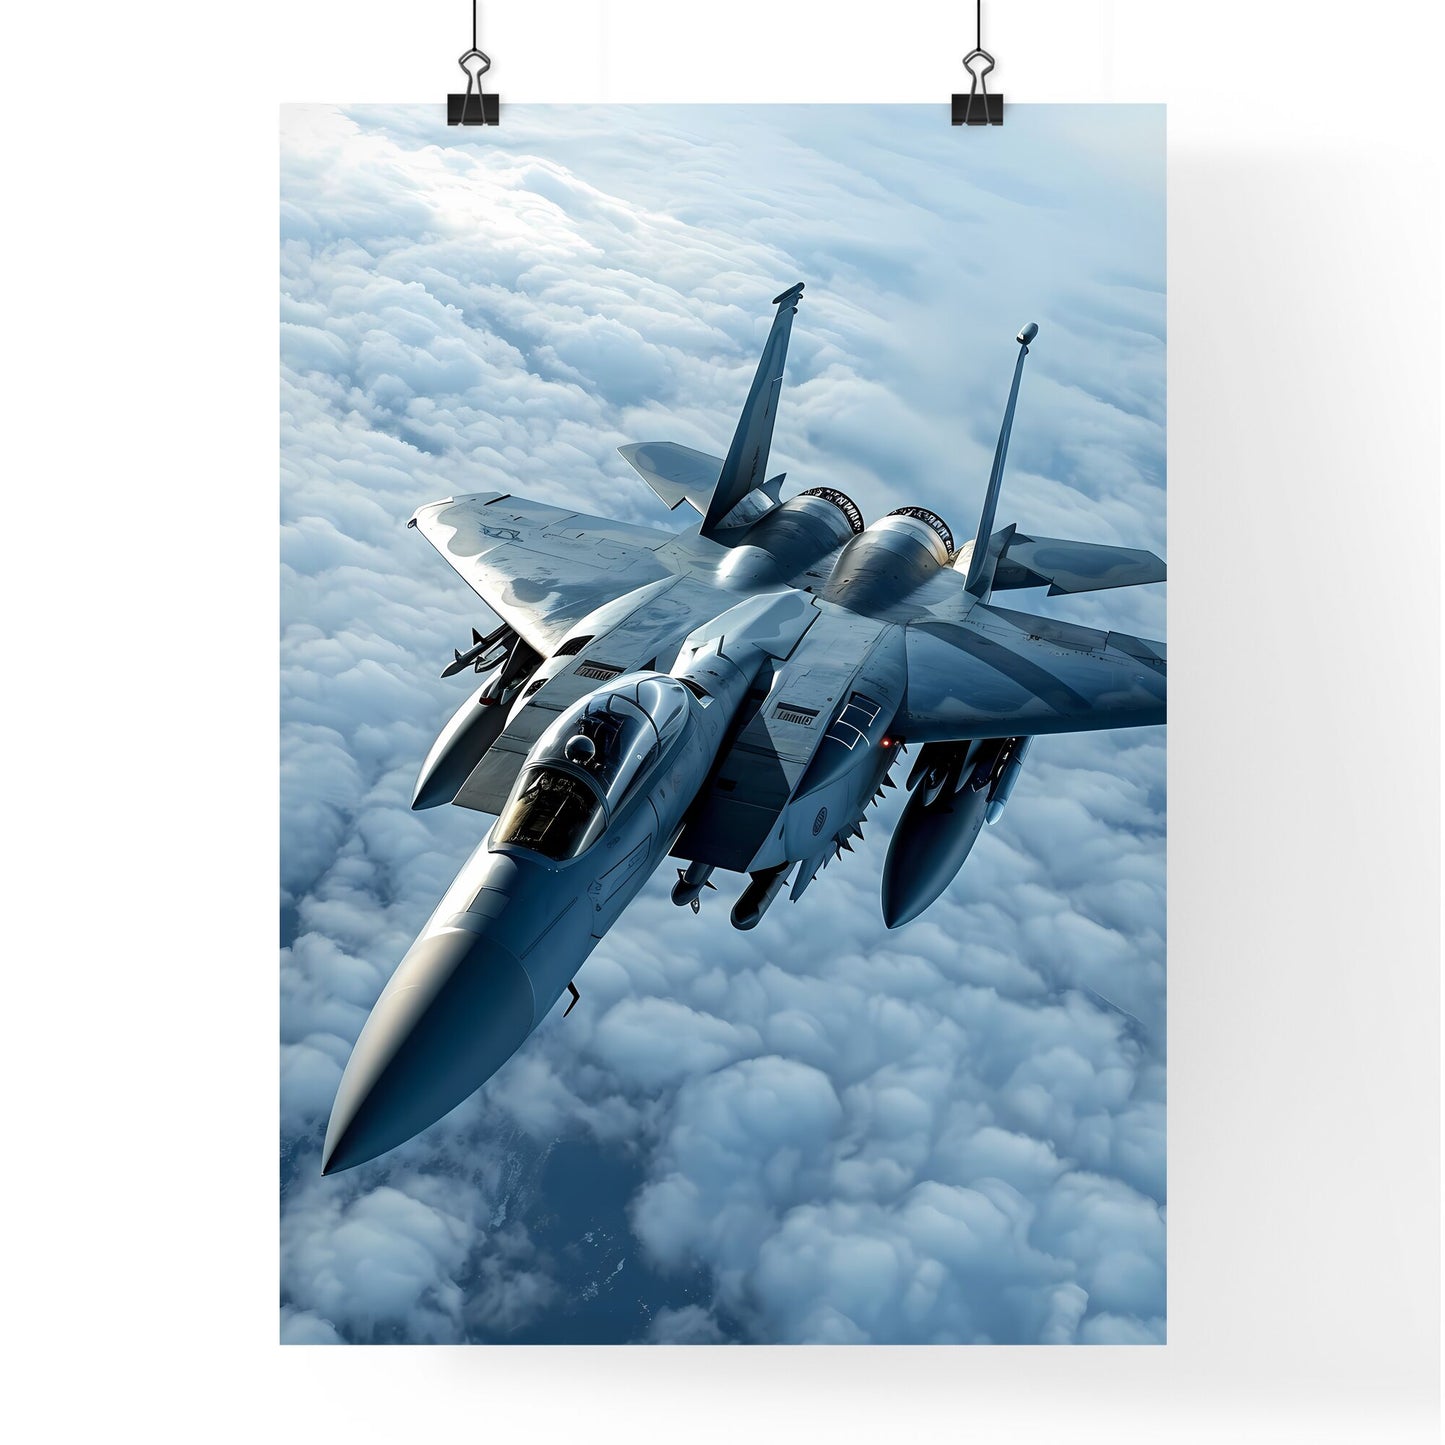 A Poster of an F-15 fighter Jet - A Military Jet Flying In The Sky Default Title